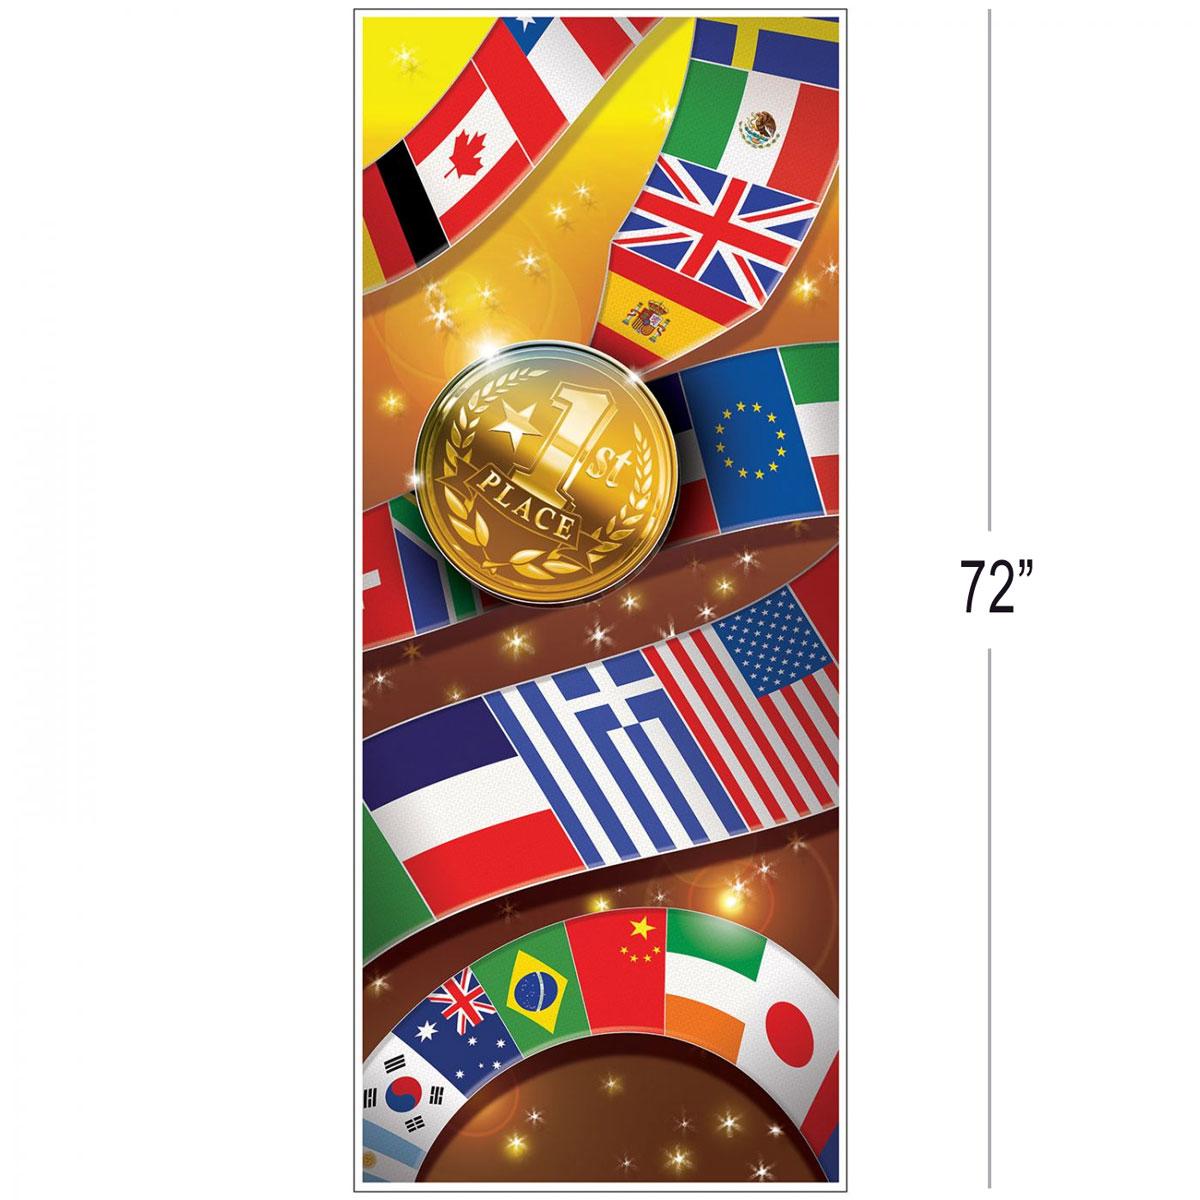 International summer sports or Olympic celebration door cover. Impressive and  a super welcoming decoration by Beistle 53556 available here at Karnival Costumes online party goods